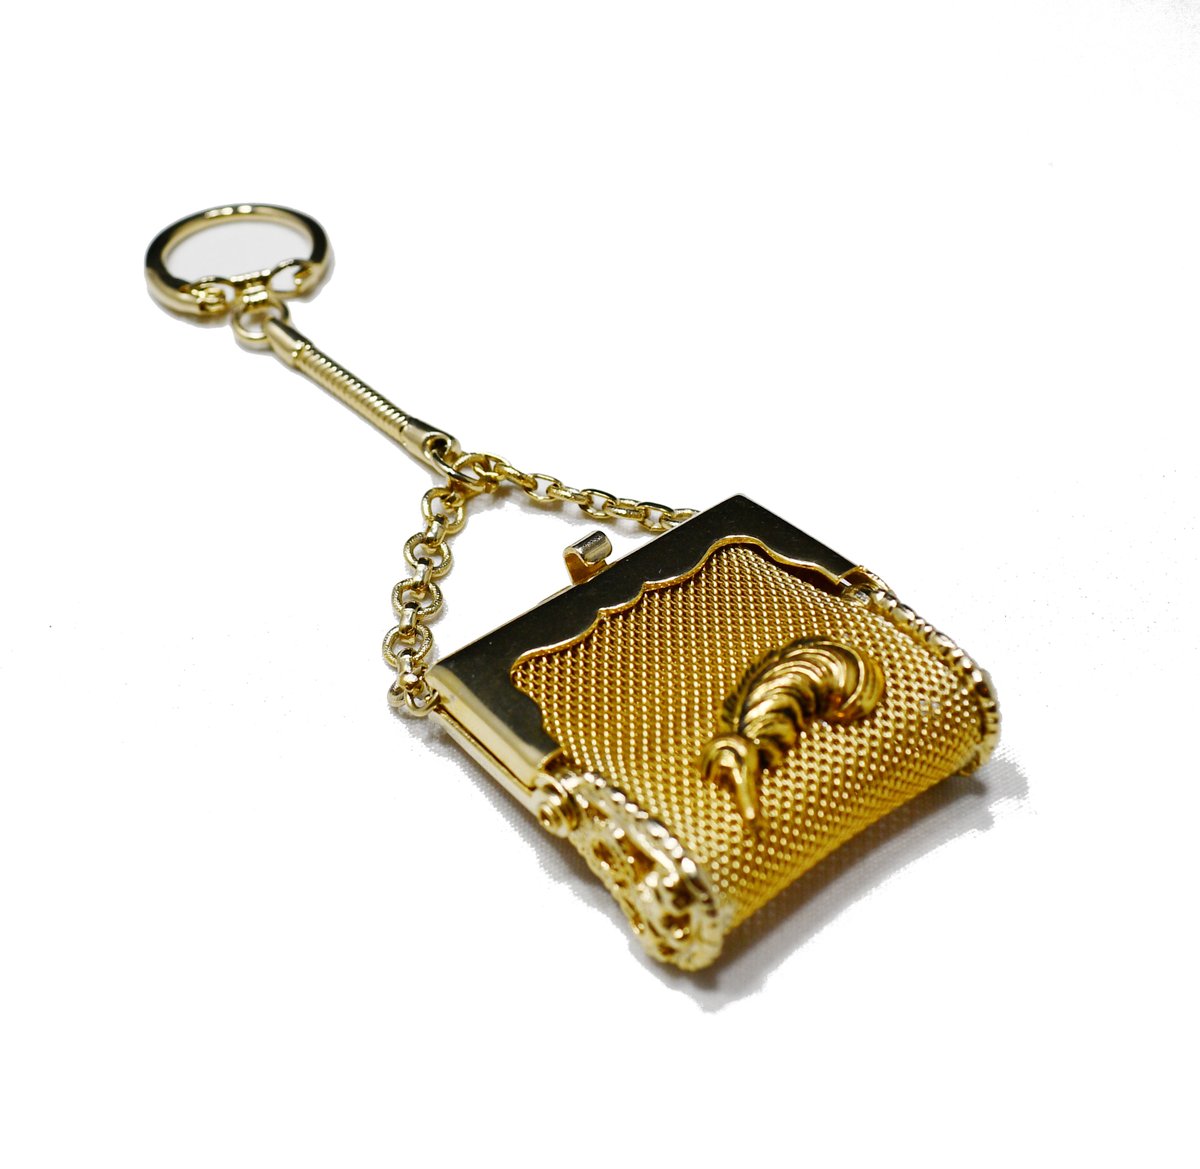 #etsy shop: Vintage Mesh Coin Purse Pendant Keychain, Gold Tone, 1950s Vintage Jewelry etsy.me/3ibH9PB #gold #women #midcentury #coinpurse #keychain #meshpurse #vintagependant #vintagejewelry #vintagegift